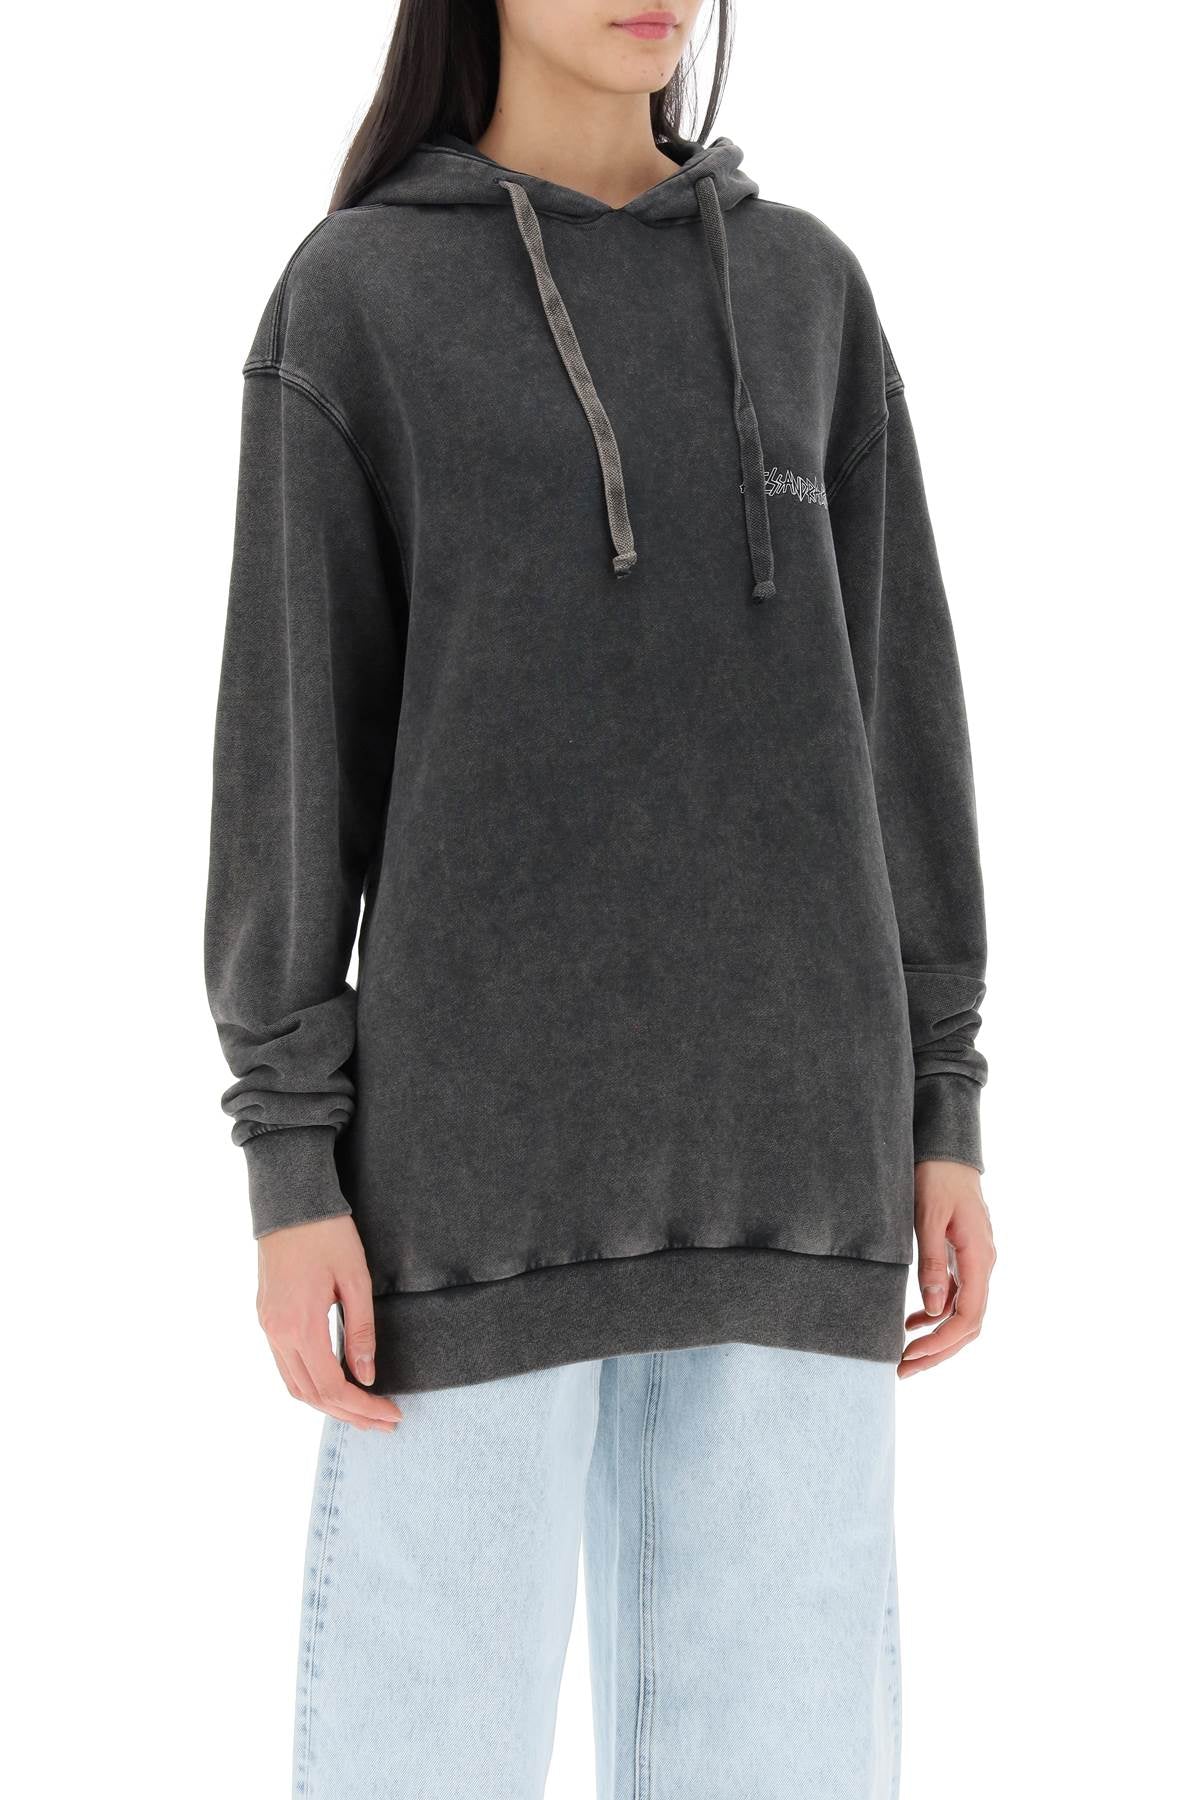 Alessandra rich oversized hoodie with print and rhinestones-1